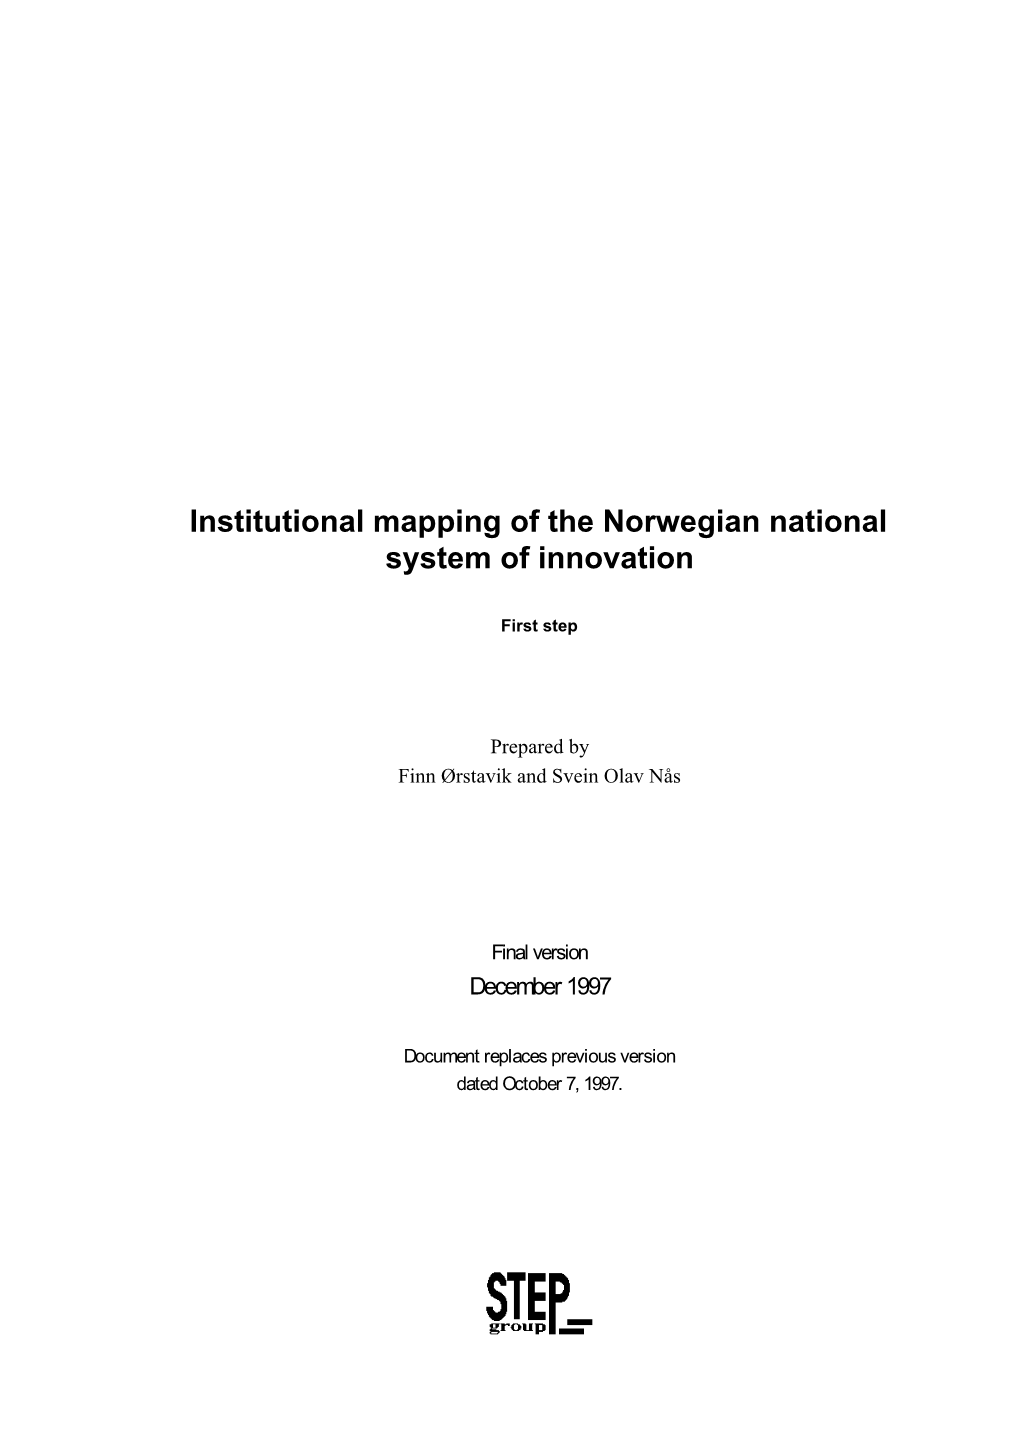 Institutional Mapping of the Norwegian National System of Innovation